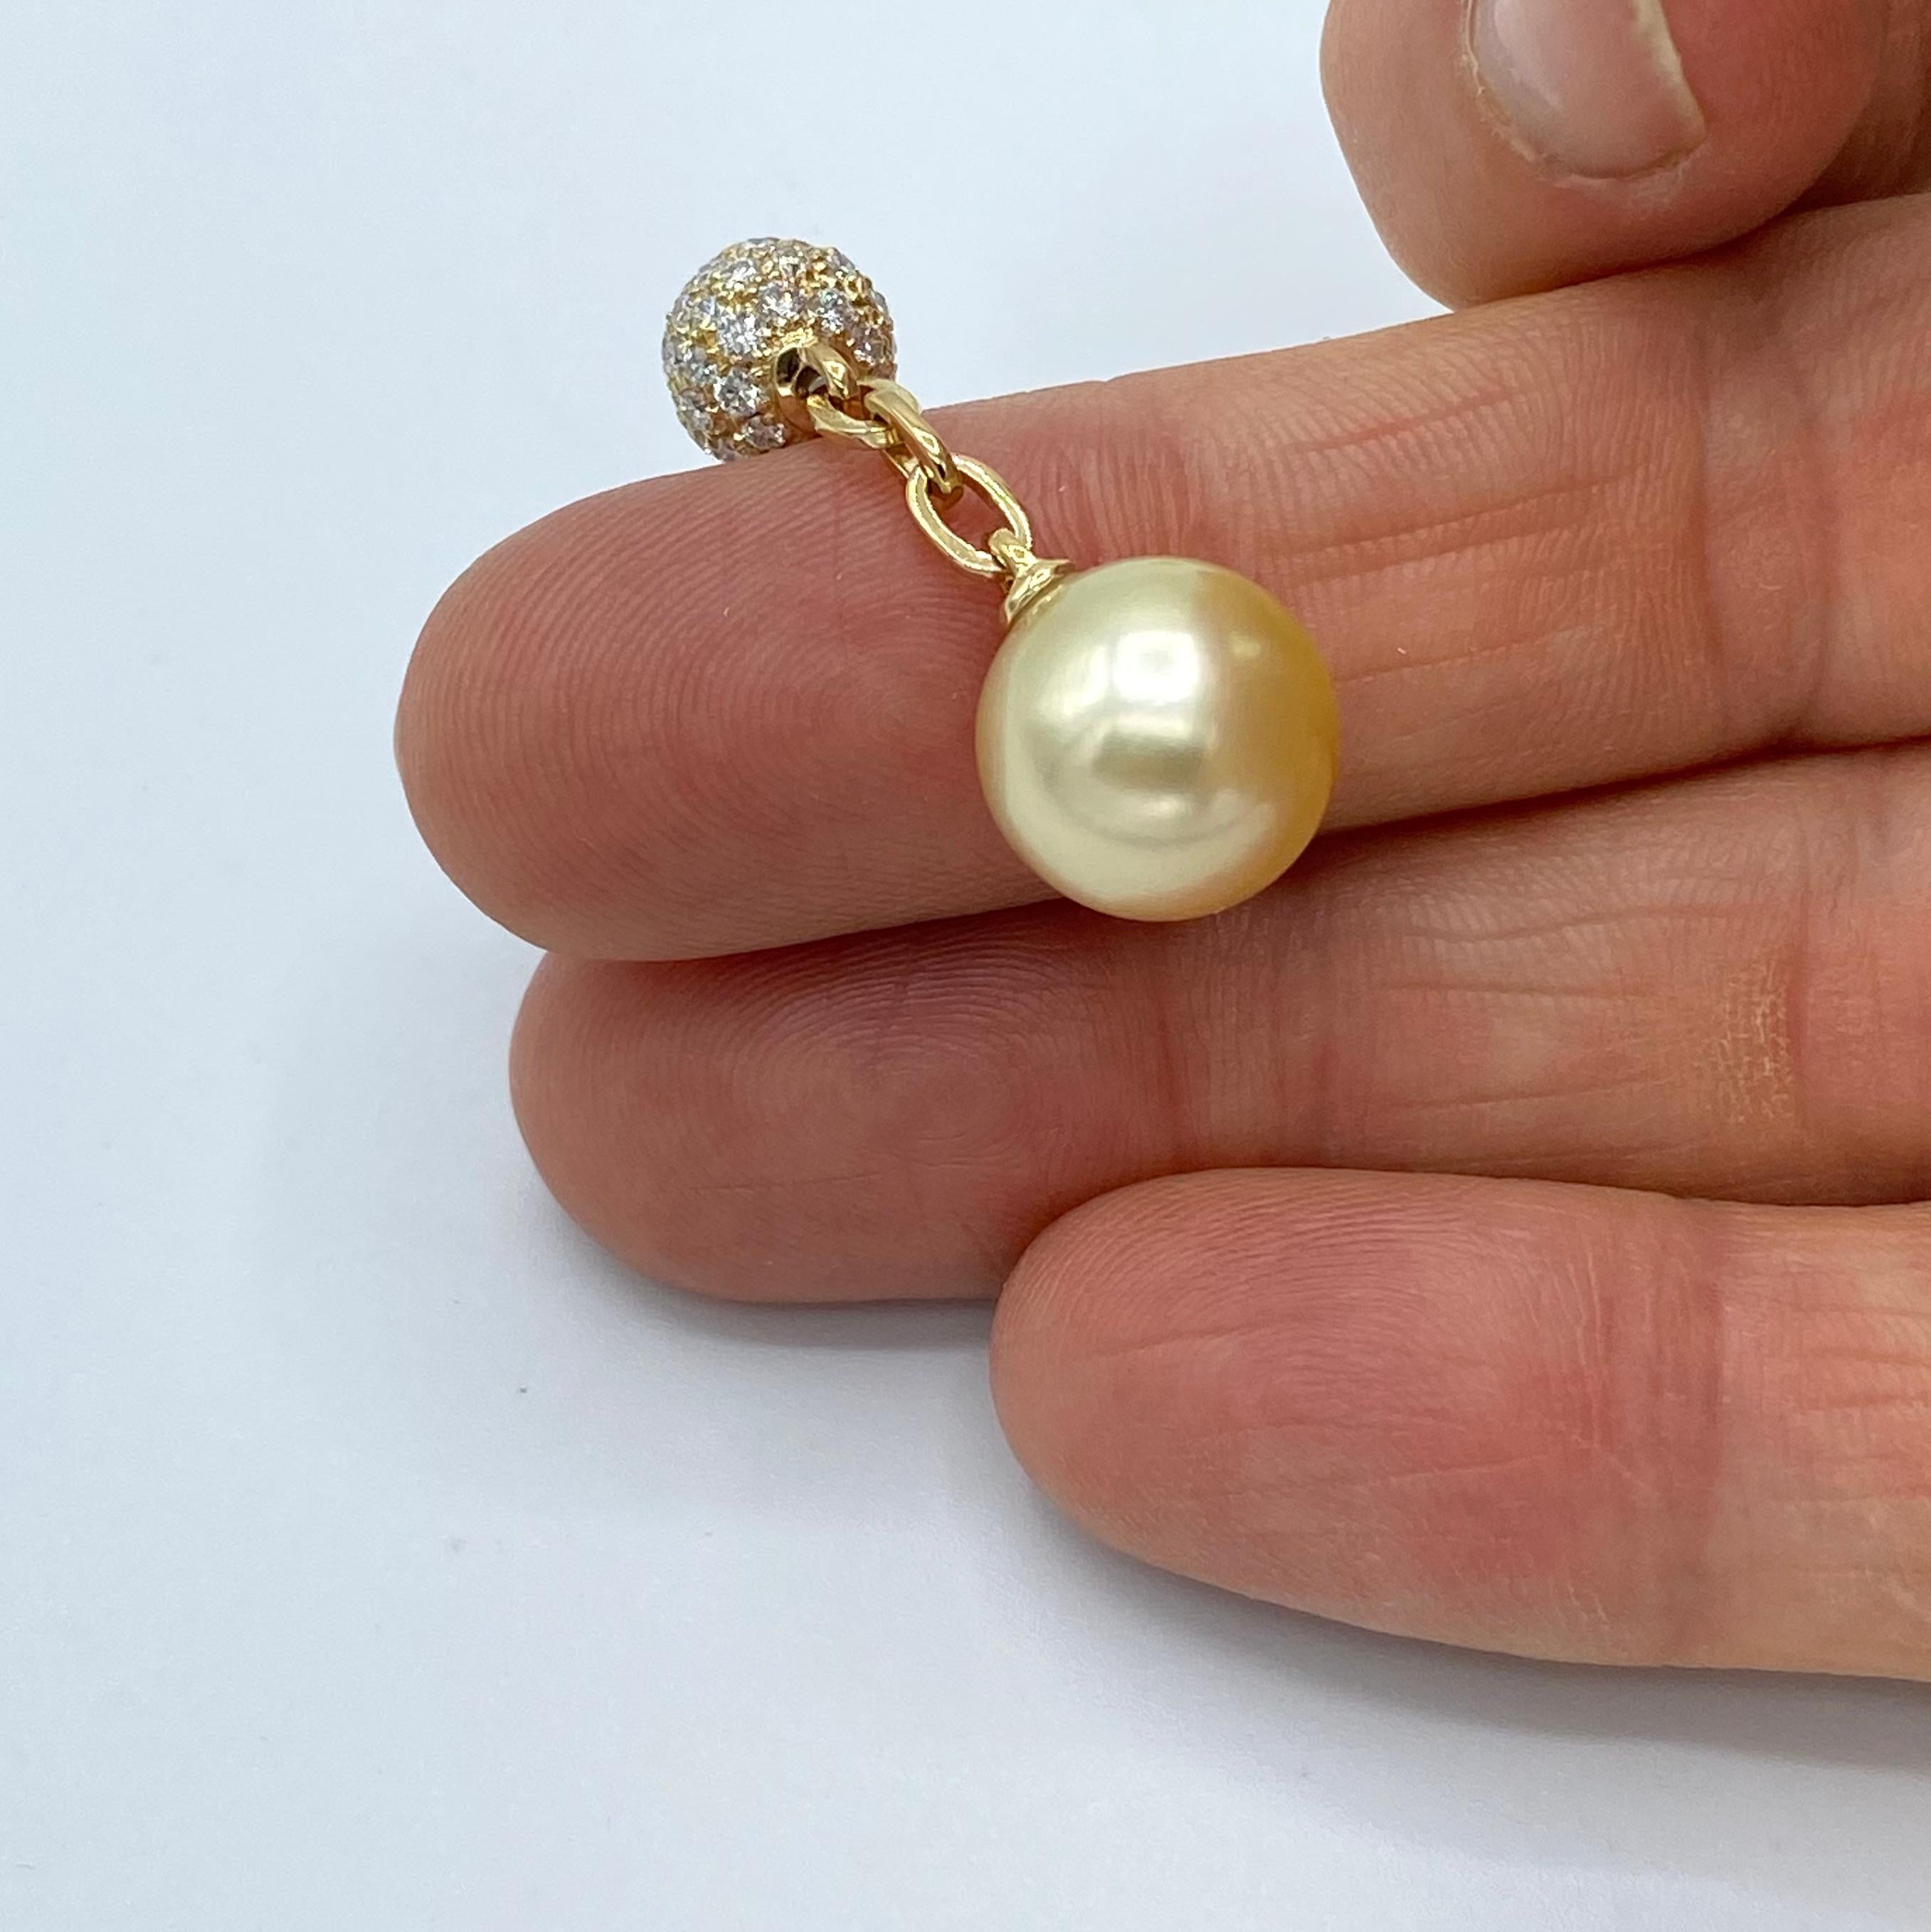 White Diamond South Sea Pearl 18 Karat Gold Cufflinks Made in Italy In New Condition For Sale In Bussolengo, Verona